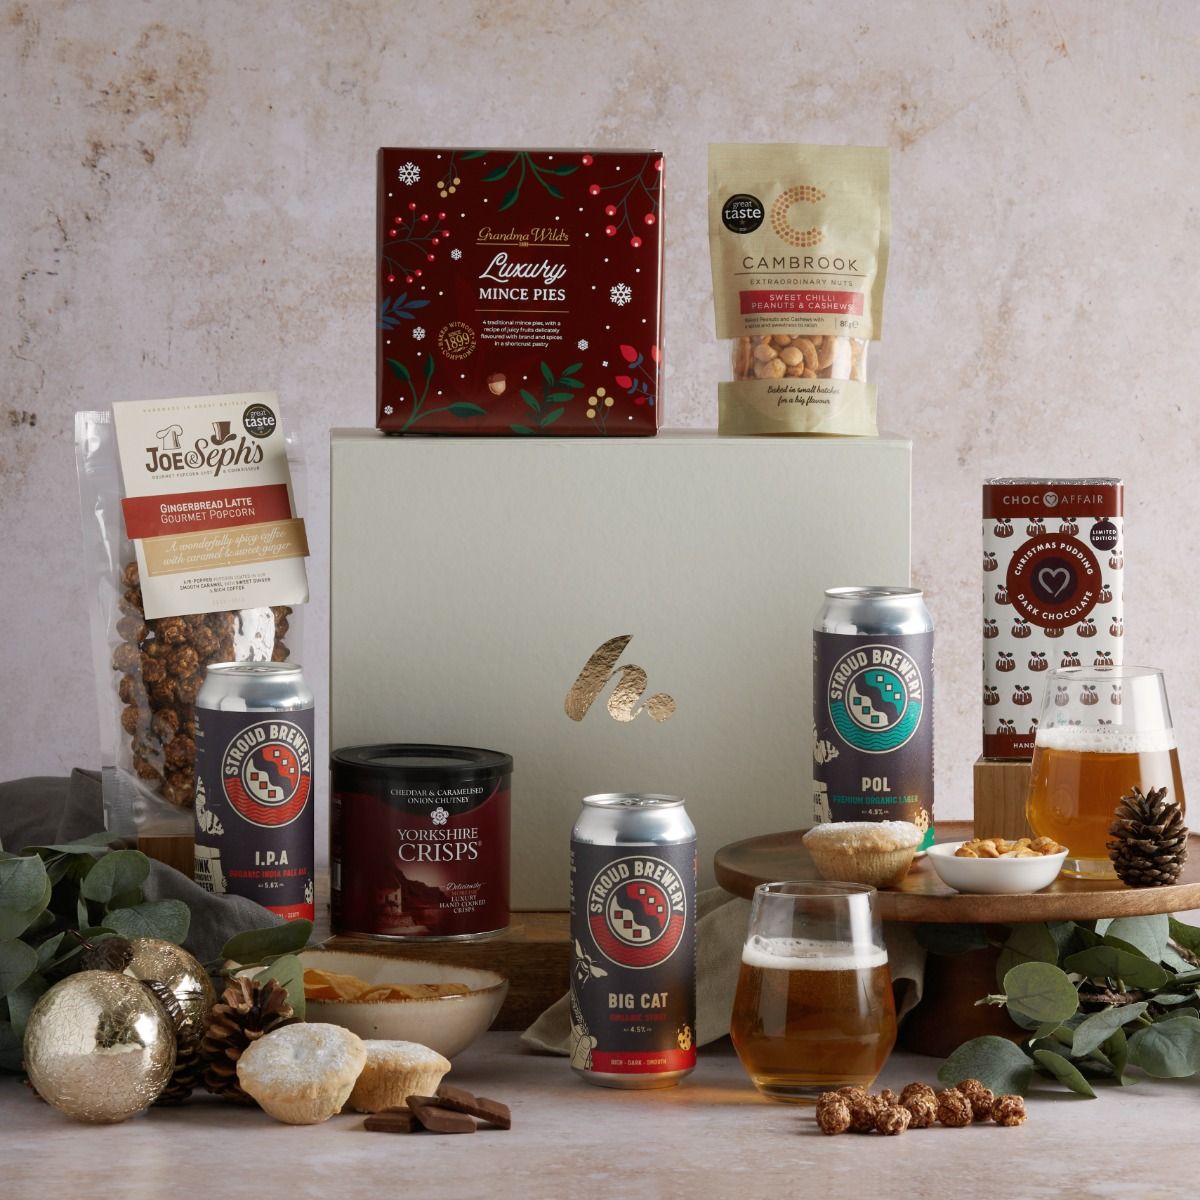 Festive Beer Hamper with contents on display